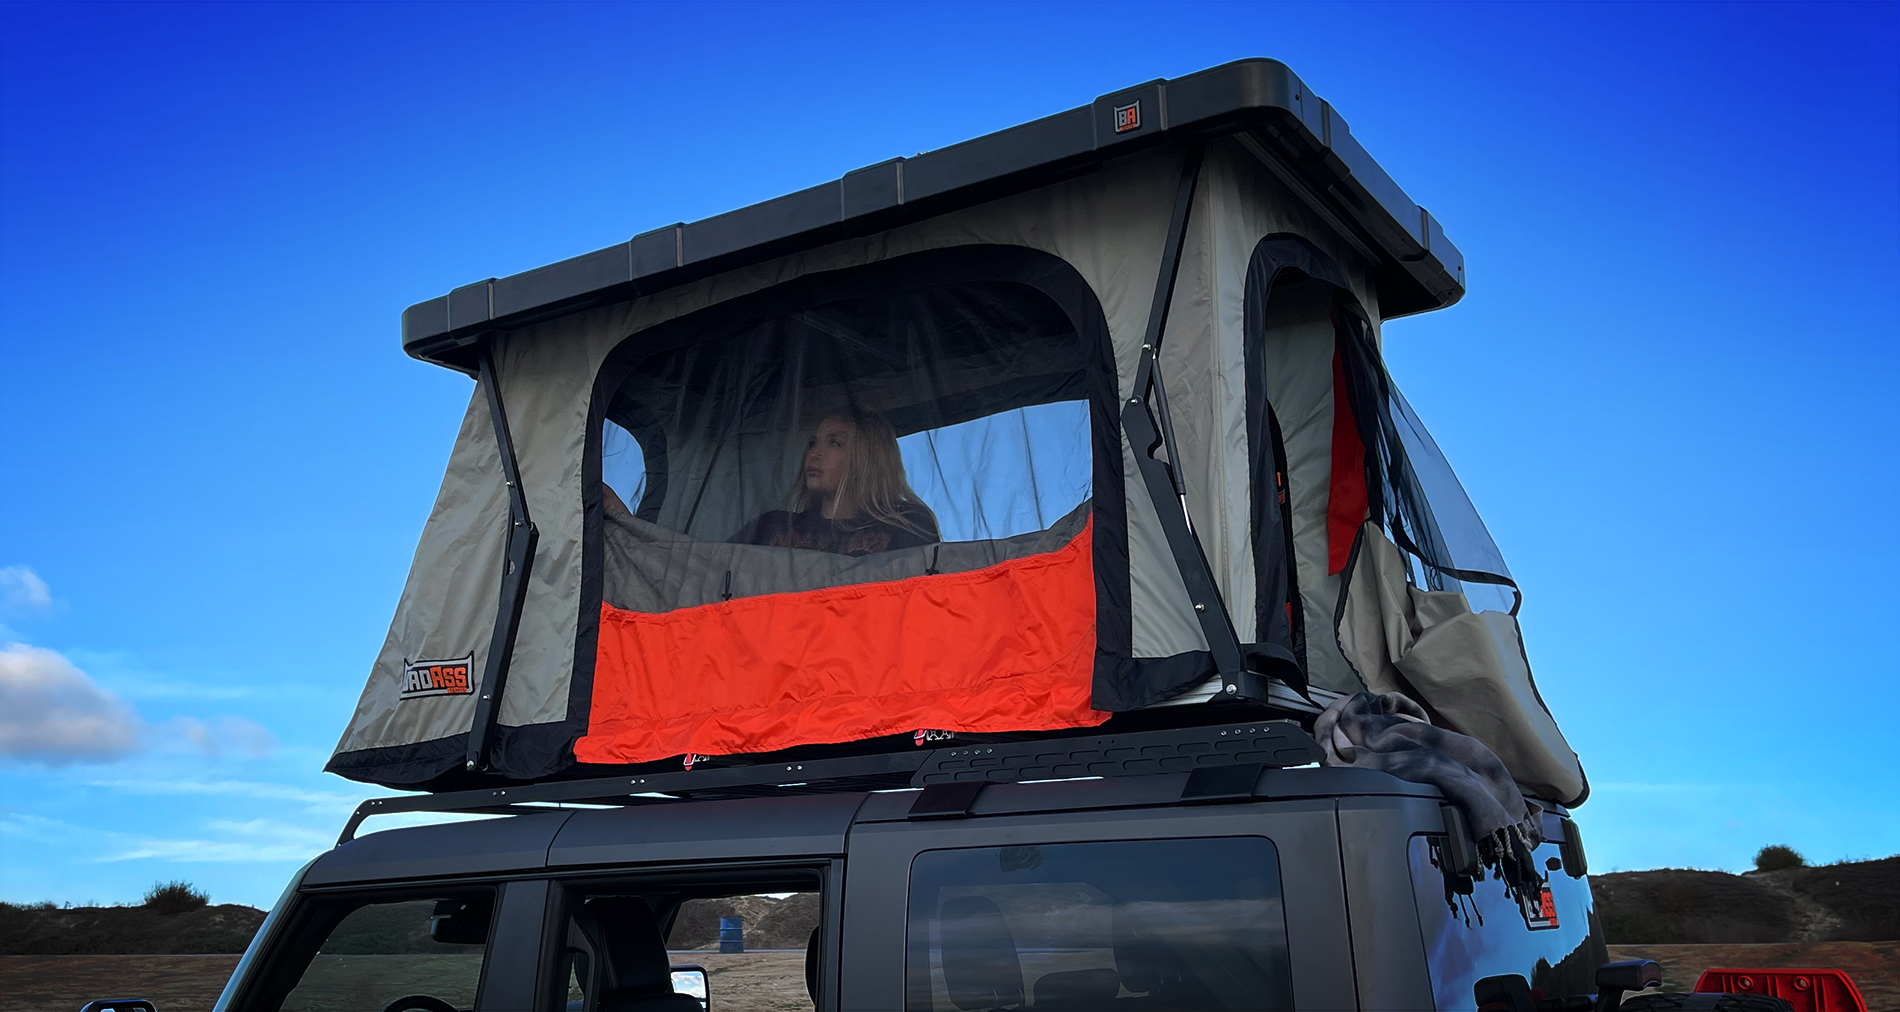 bronco at beach with badass tents RECON roof top tent-3